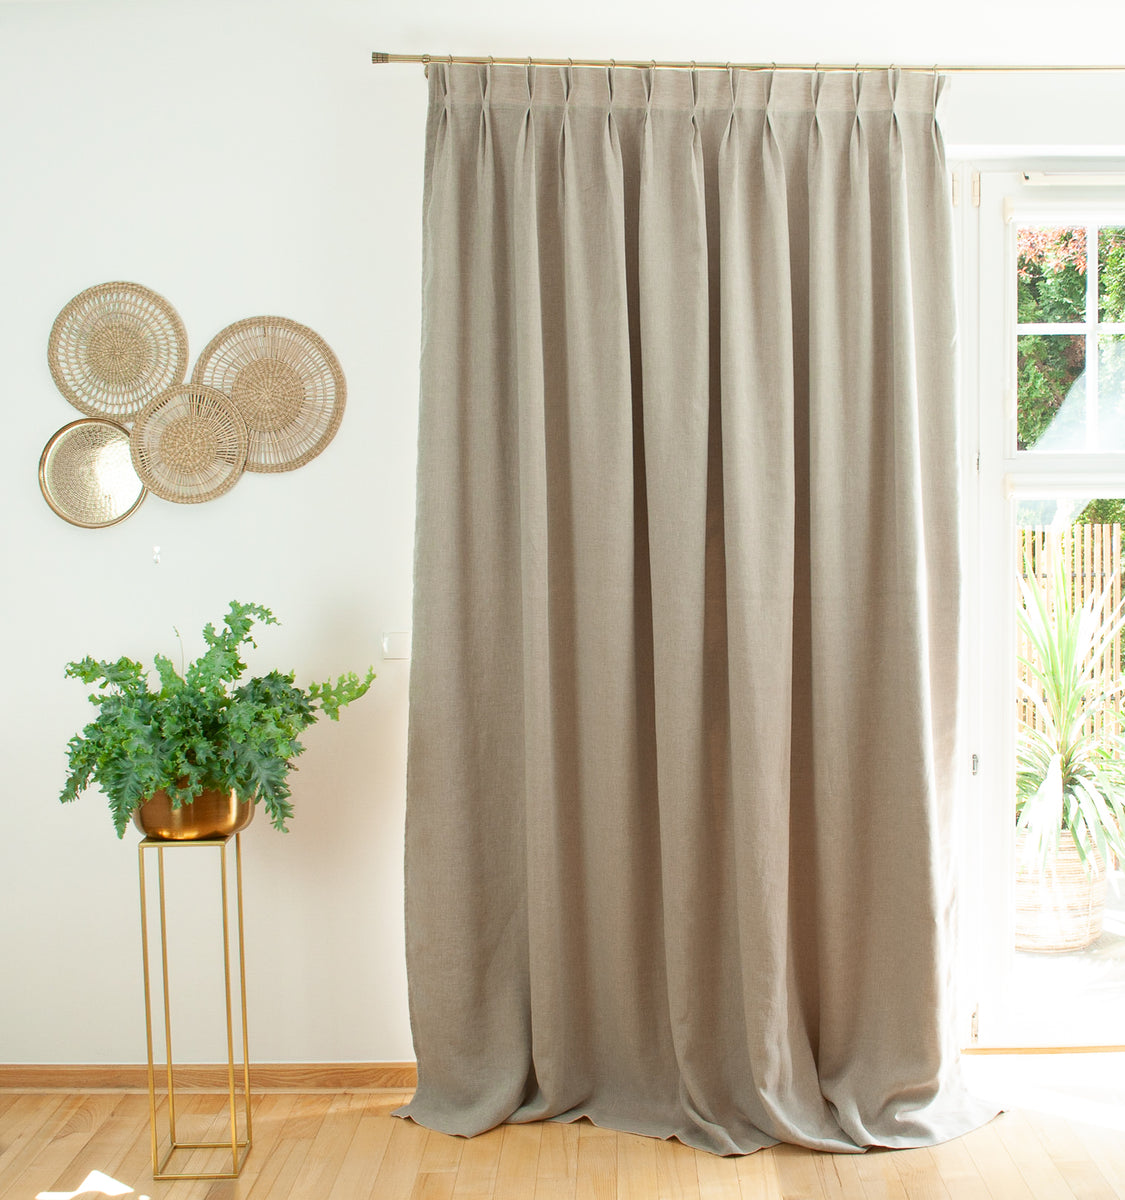 Double Pinch Pleat Linen Curtain With Cotton Lining Heading For Ring 3hlinen Australia